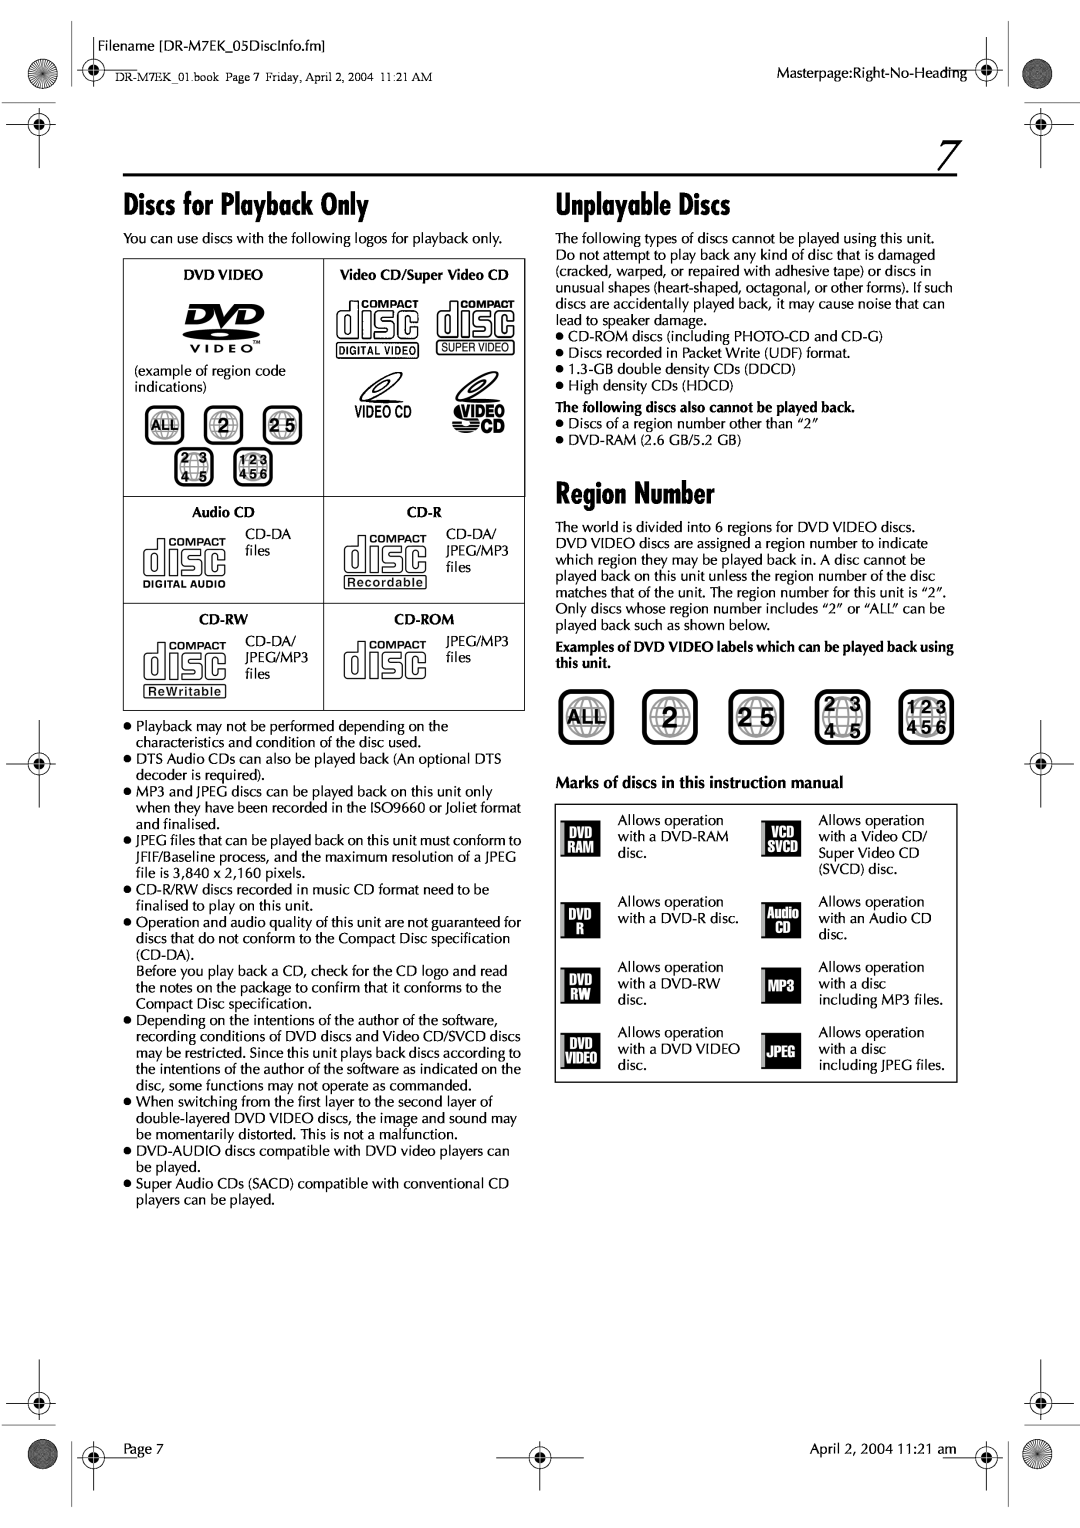 JVC DR-M7S Discs for Playback Only, Region Number, Unplayable Discs, Marks of discs in this instruction manual, Dvd Video 